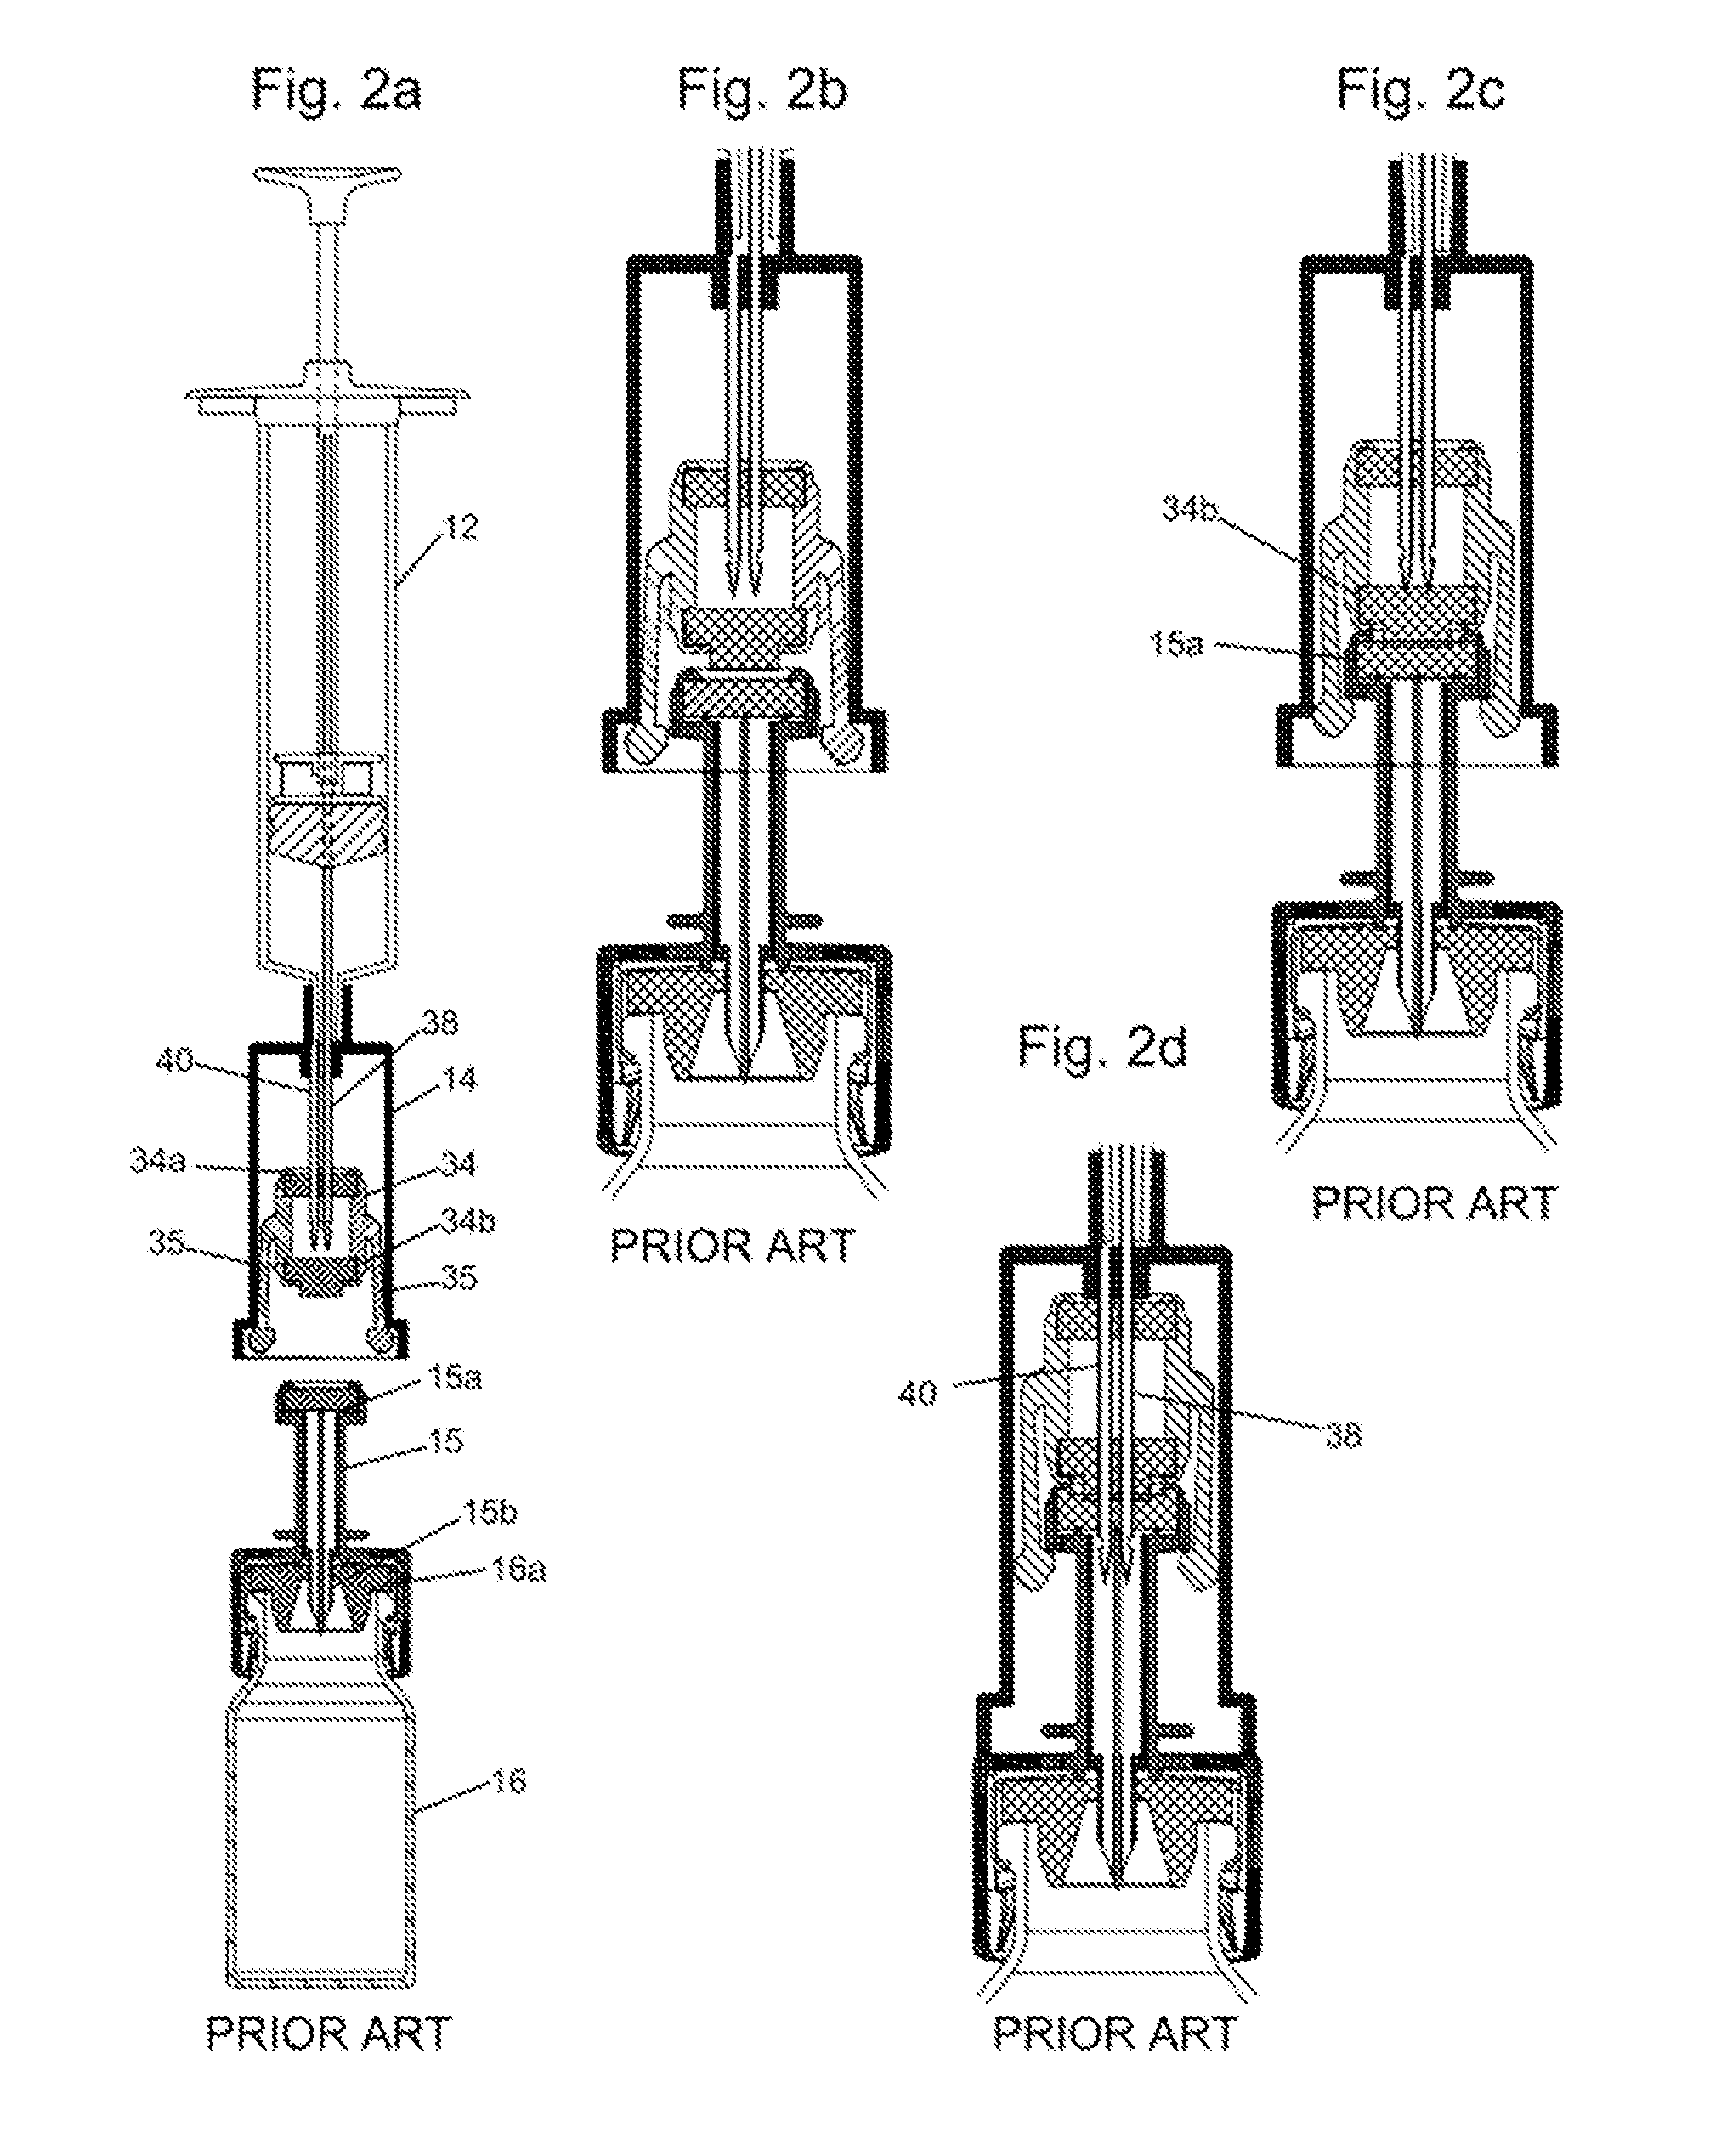 Needle valve and connectors for use in liquid transfer apparatuses